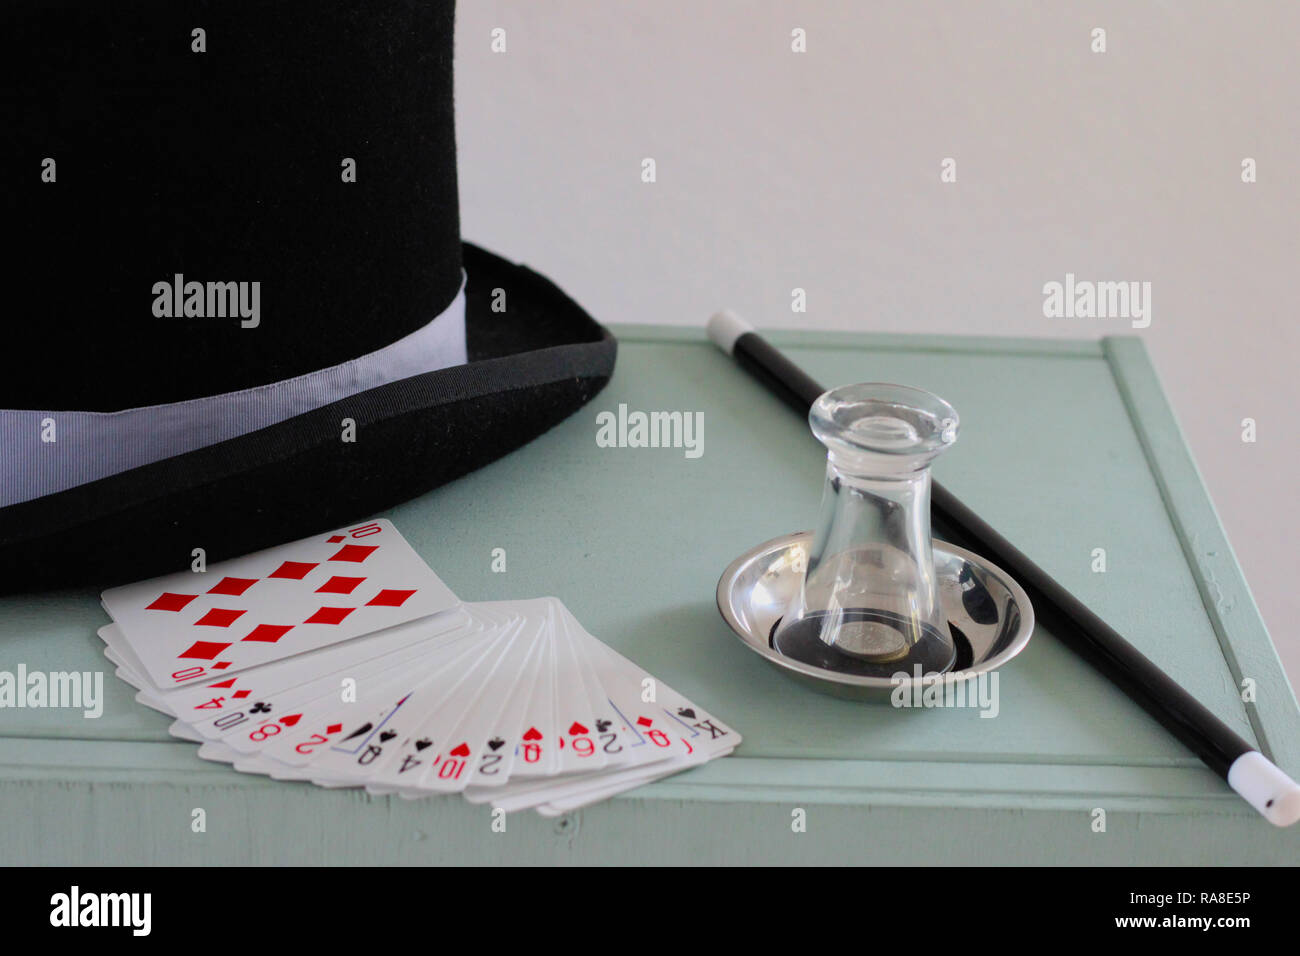 Magician's equipment on a painted chest. Stovepipe hat, cards, glass, coins, magic wand for magic tricks. Stock Photo